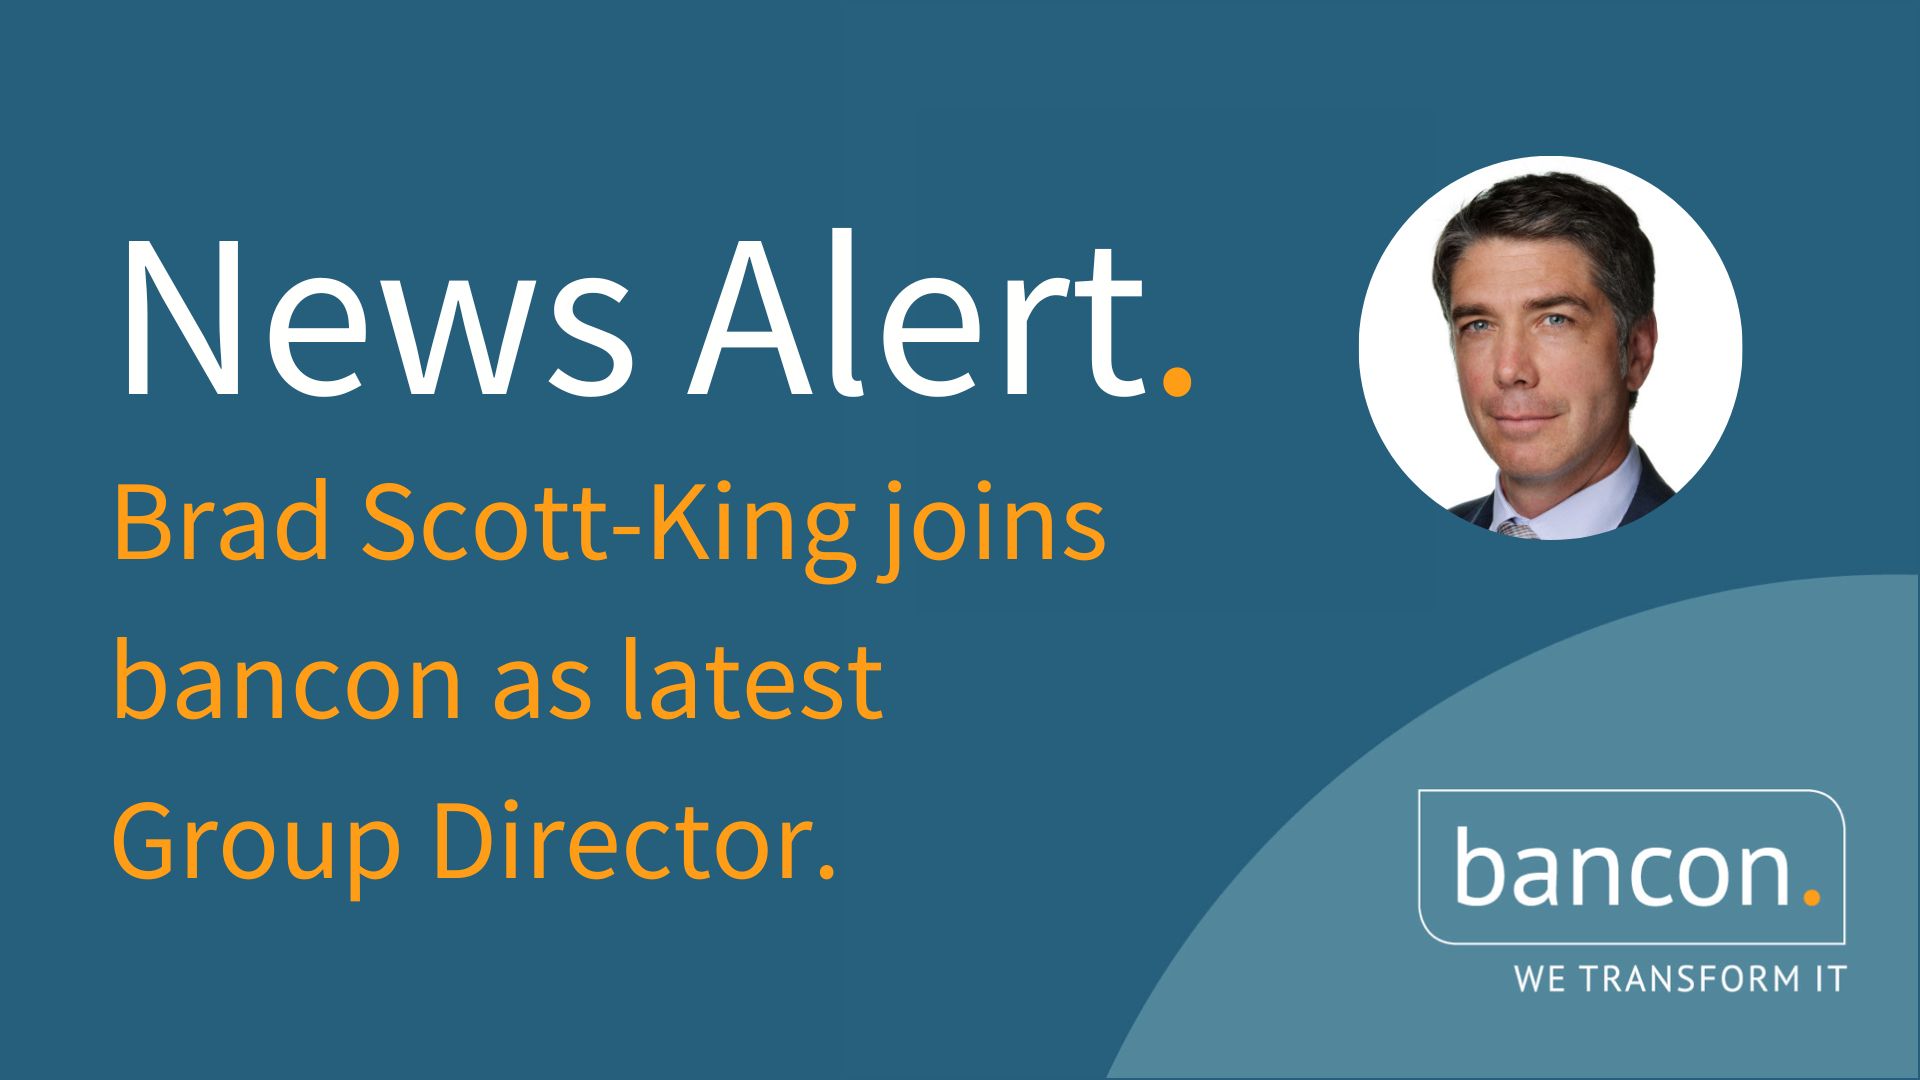 bancon announce Brad Scott-King as their newest Group Director